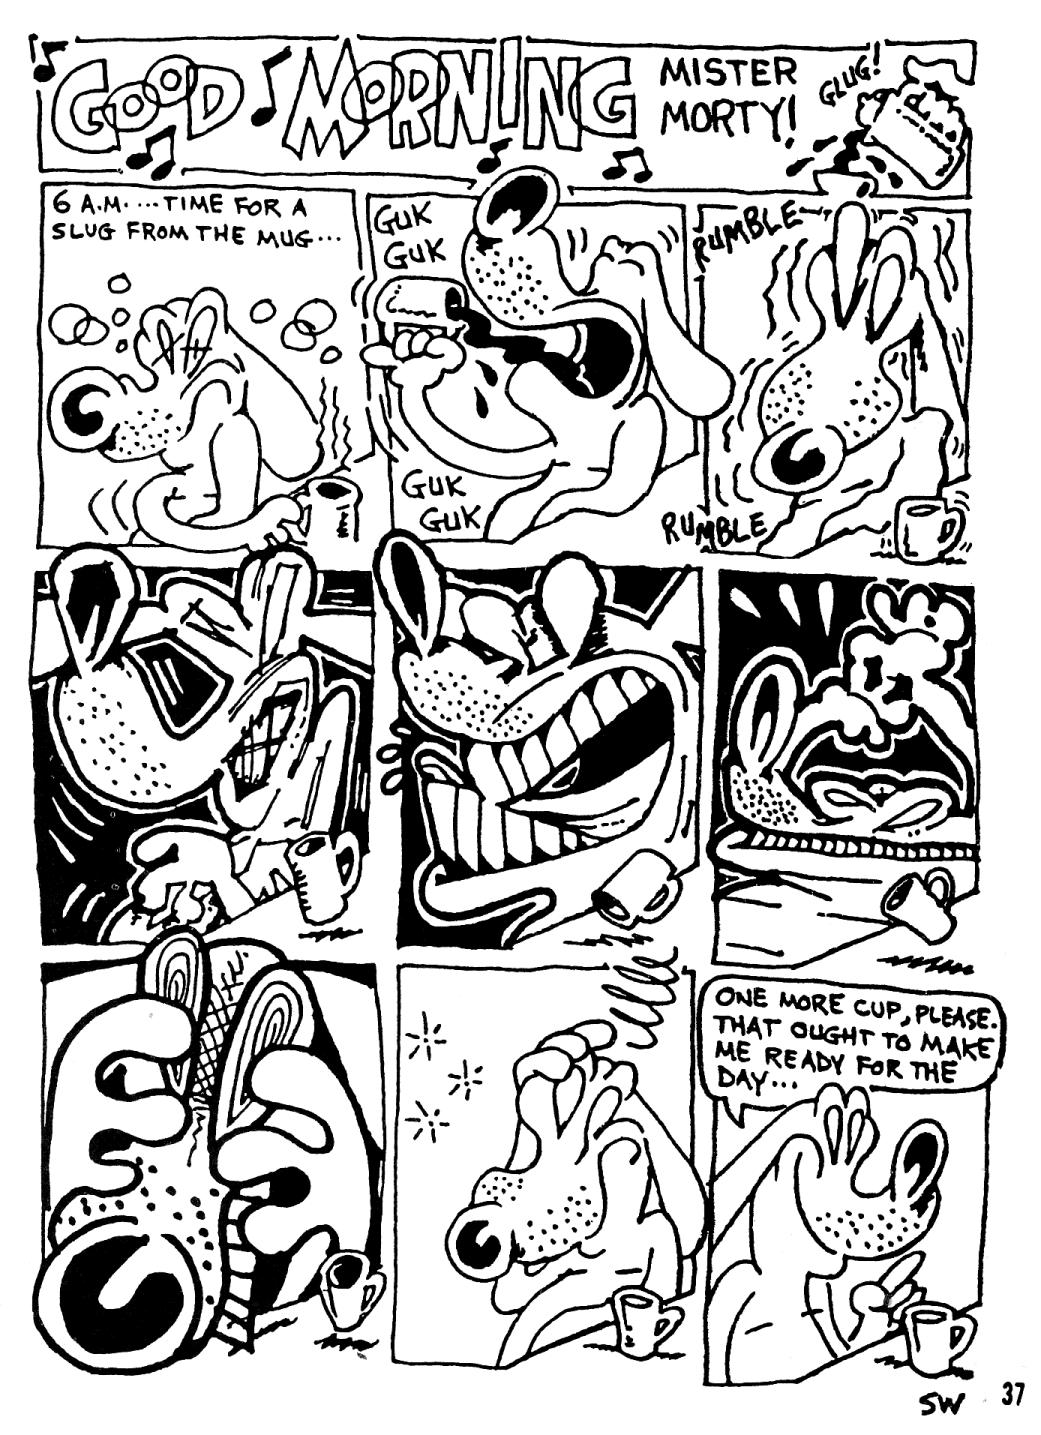 Read online Morty the Dog (1991) comic -  Issue # Full - 37